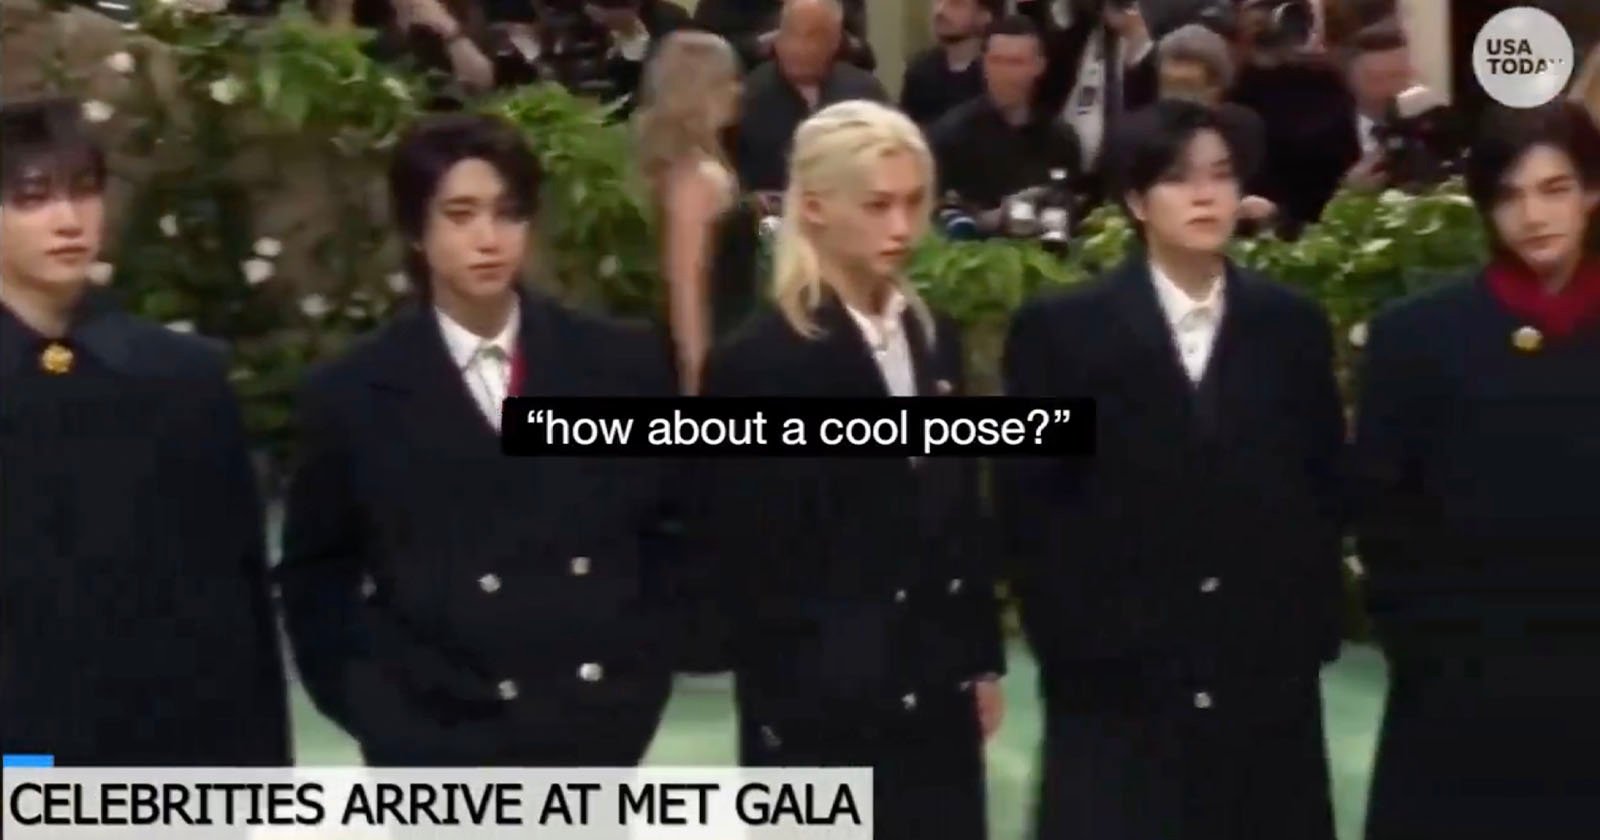 Met Gala Photographers Criticized for Racist Comments About K-Pop Band